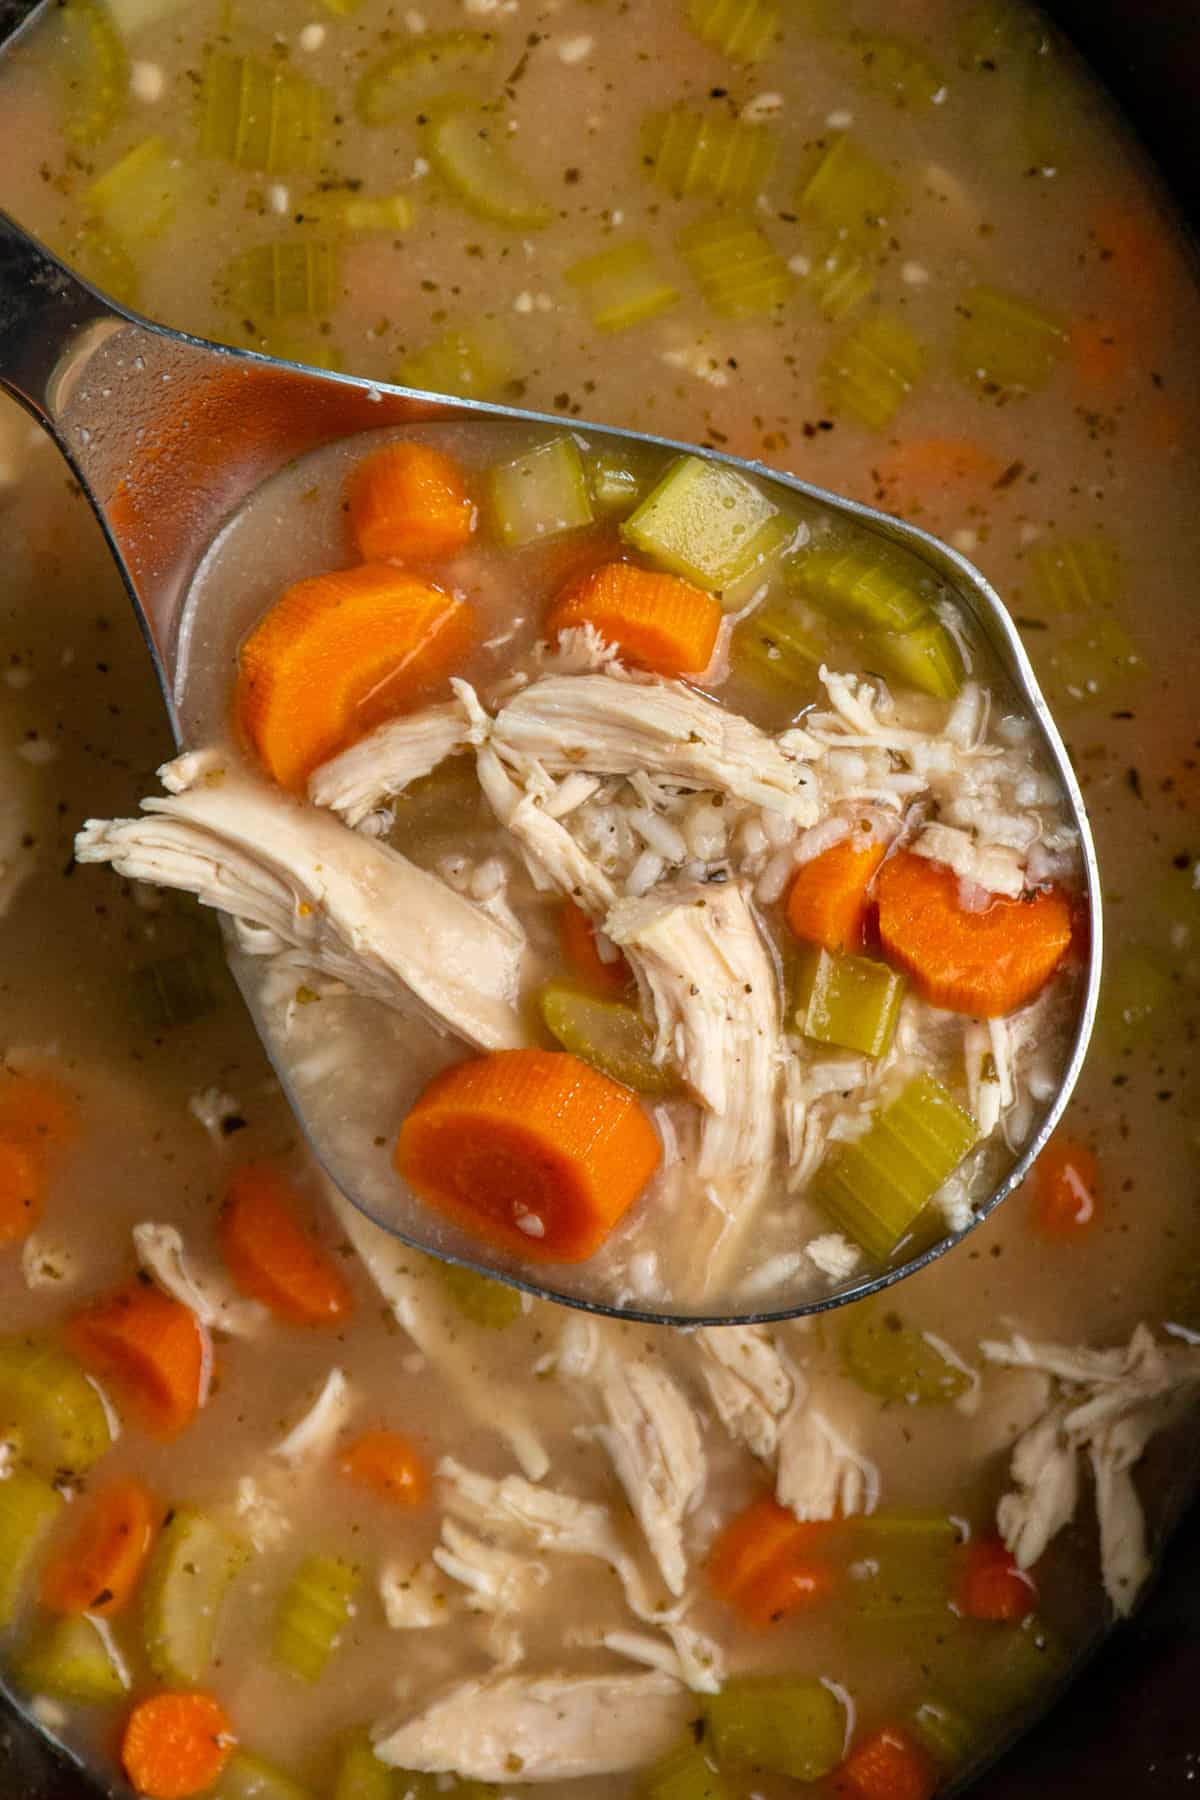 Overhead look at chicken and rice soup in a laddle over a slow cooker.